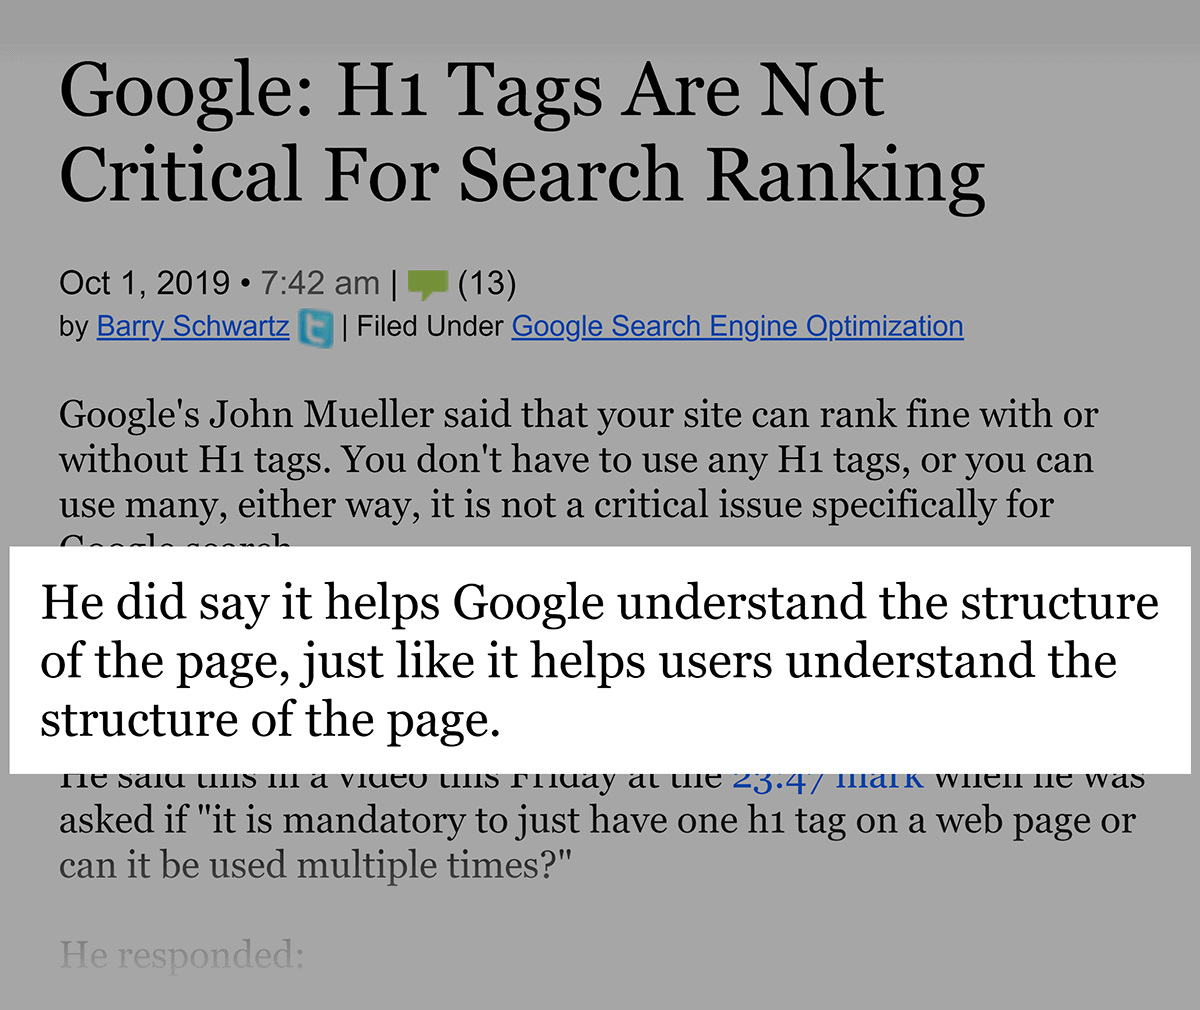 Google on H1 tags for rankings